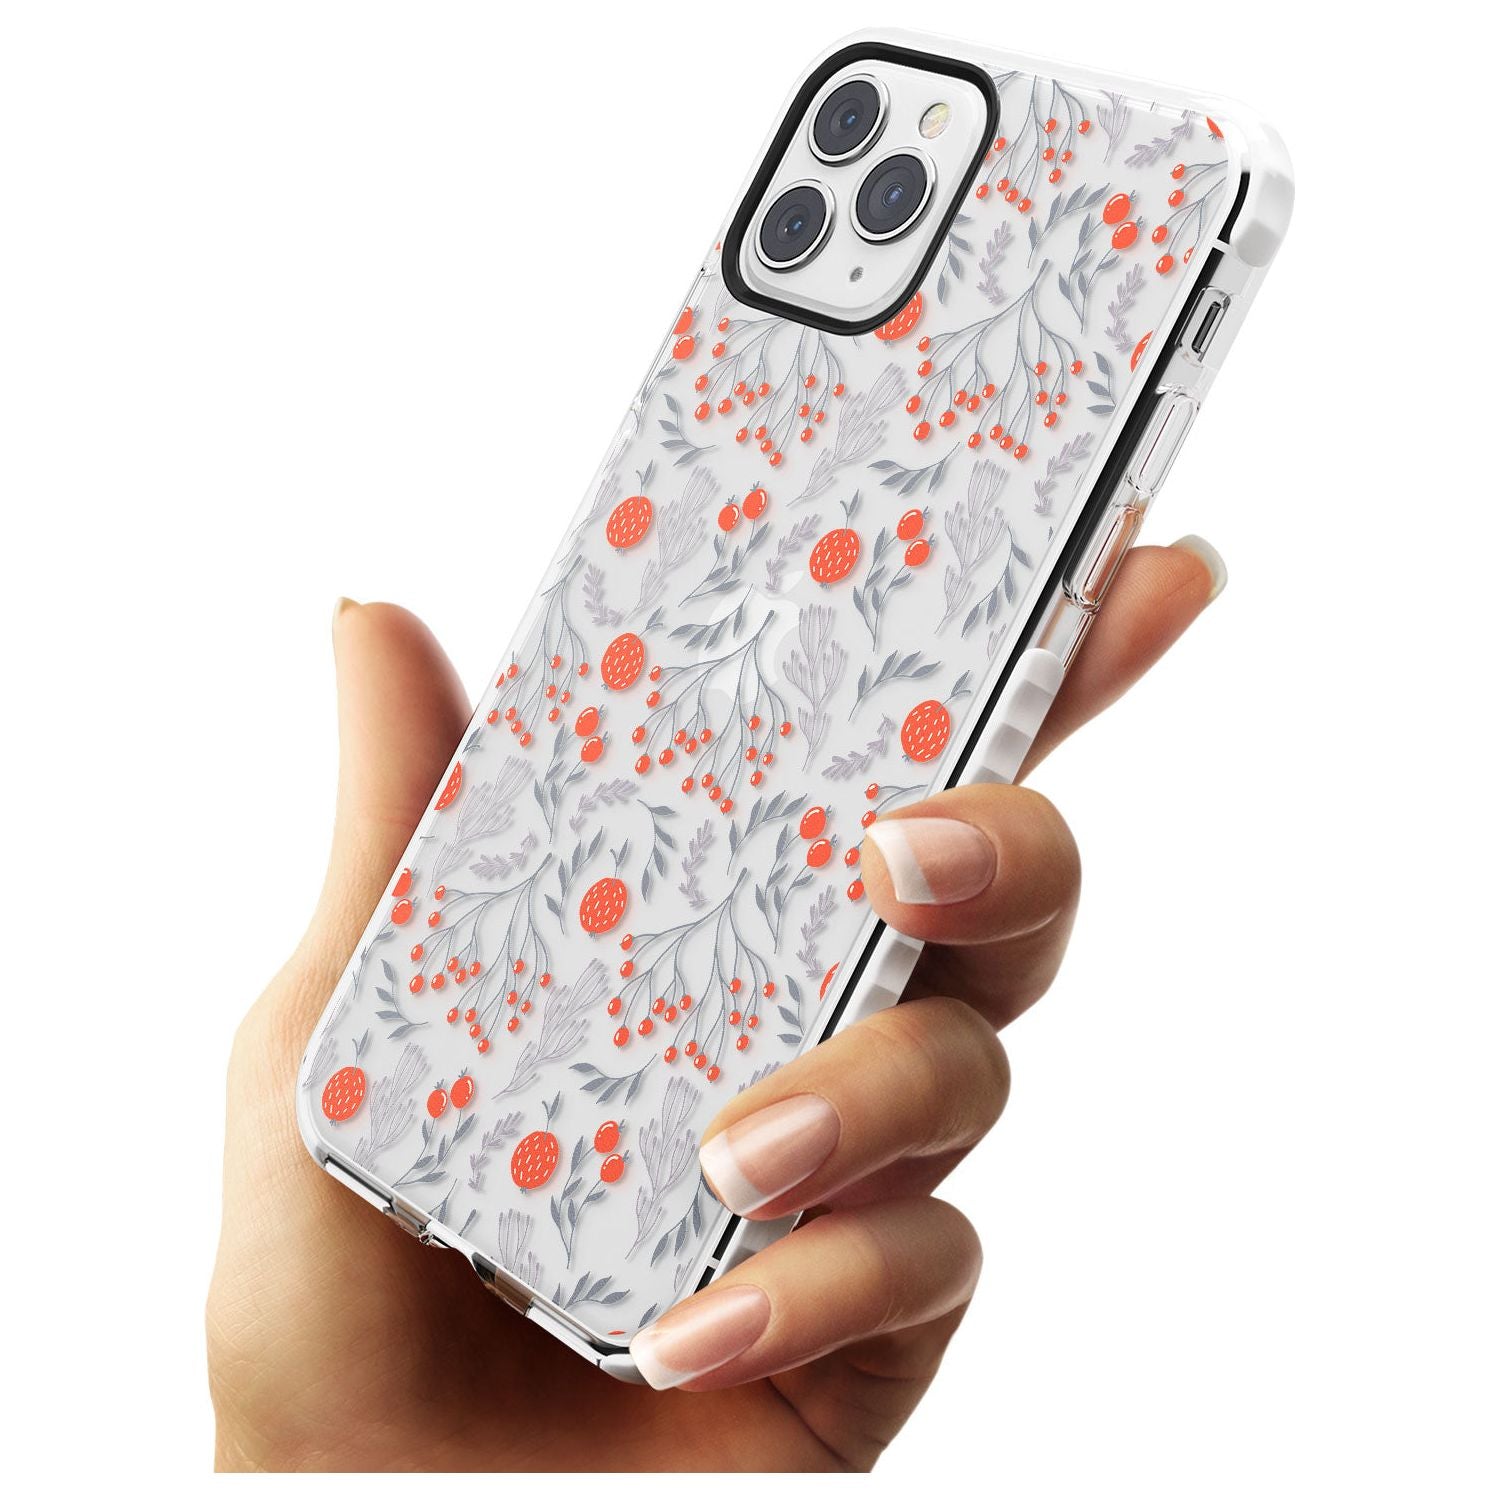 Red Fruits Transparent Floral Impact Phone Case for iPhone 11 Pro Max